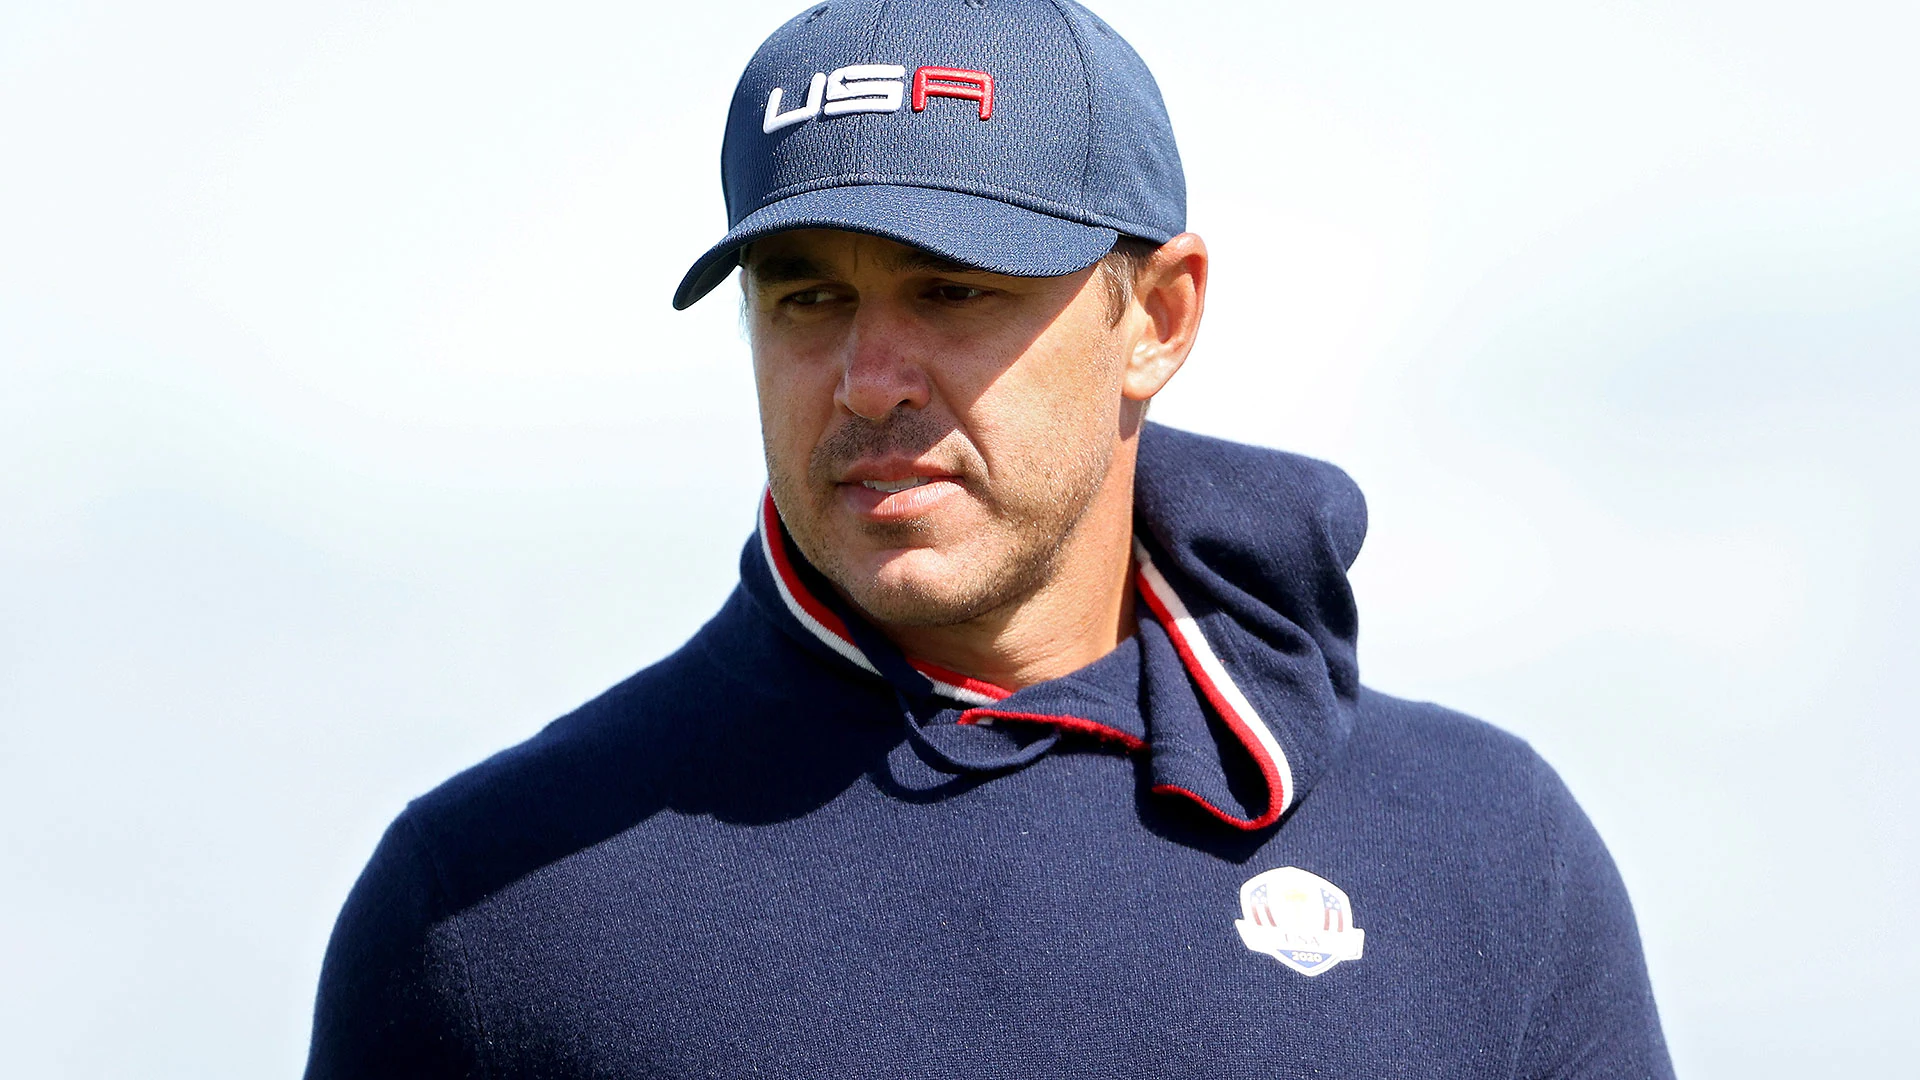 Brooks Koepka Trying to End Stretch of ‘Playing So Bad For So Long’